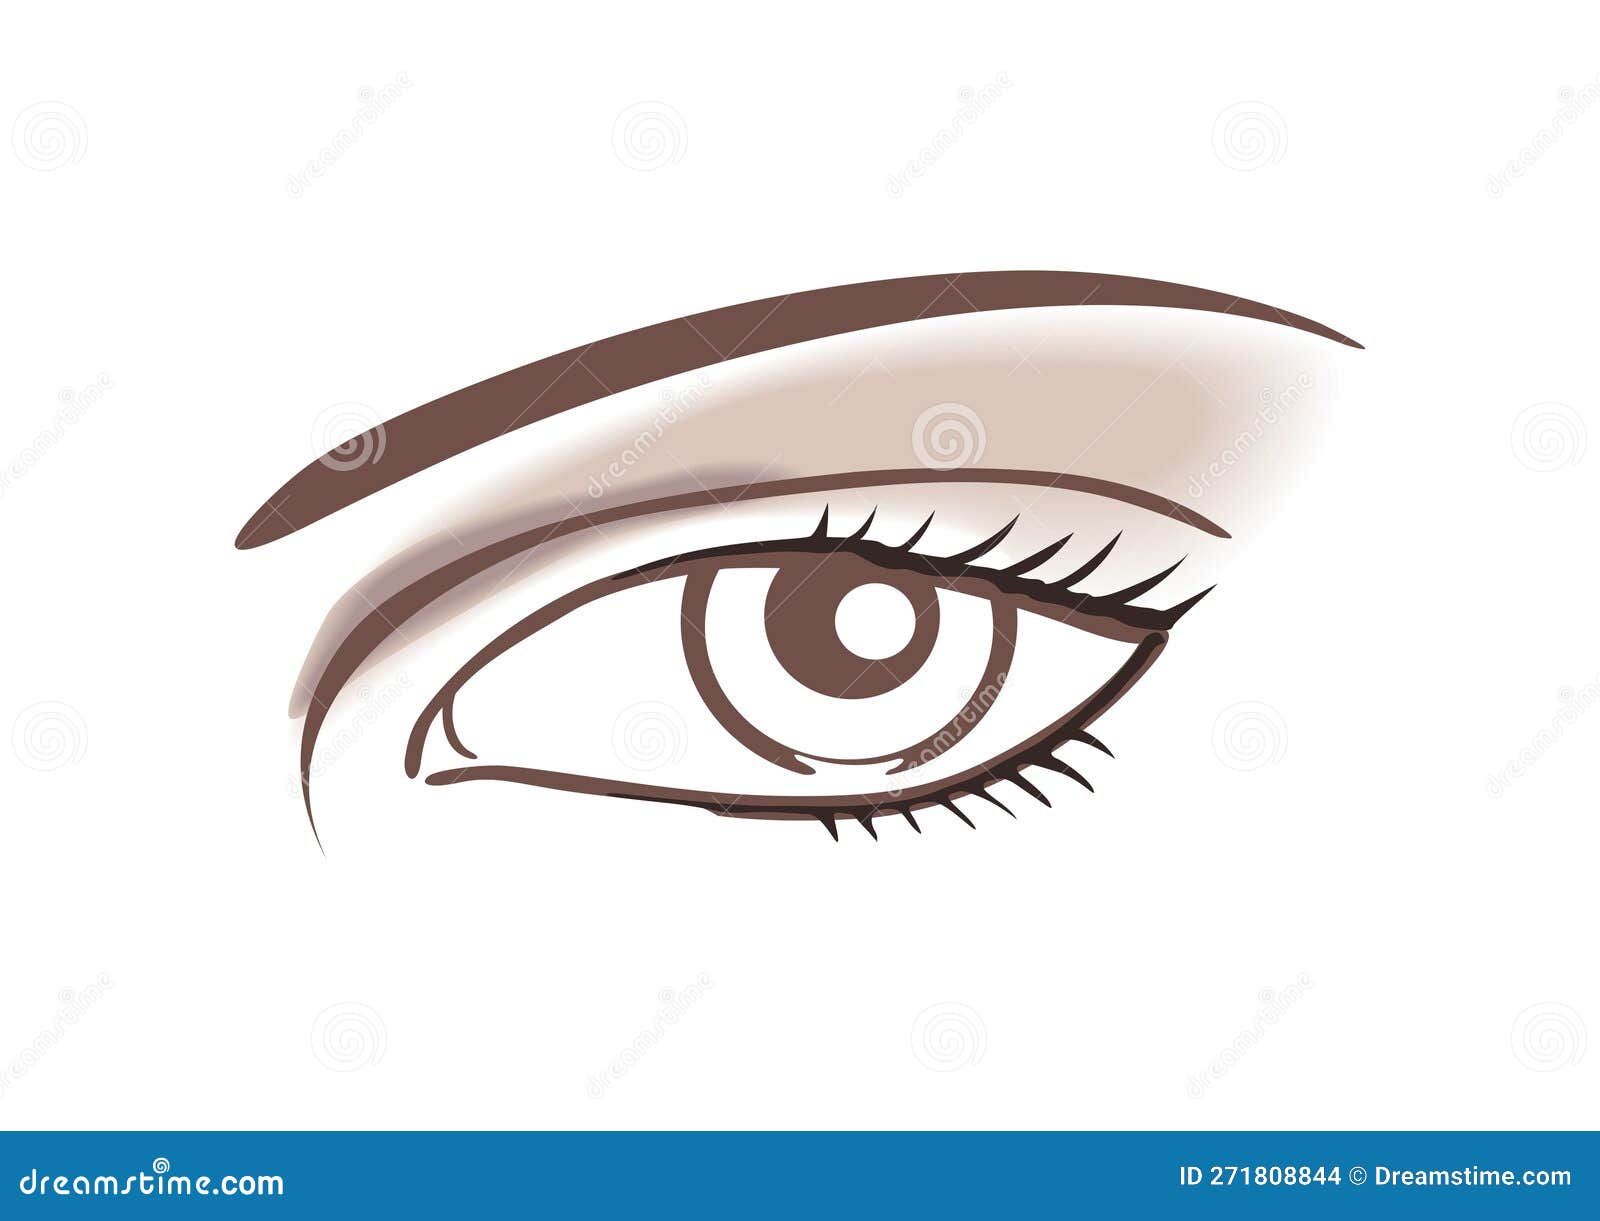 line drawing of a woman's eye.  